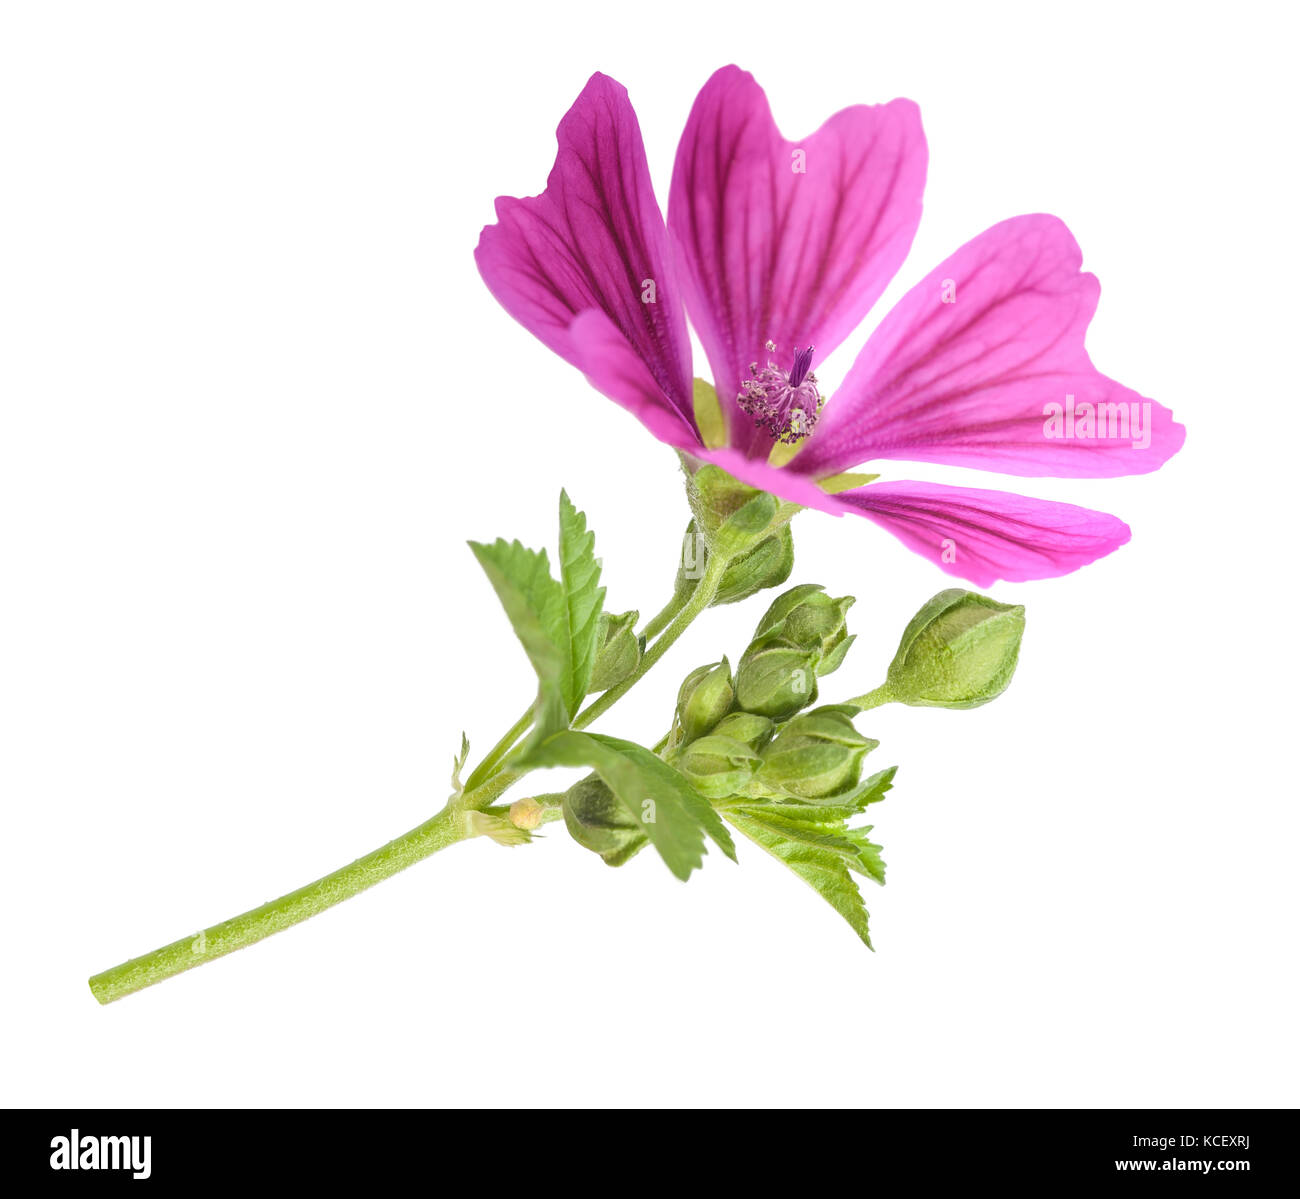 Mallow plant with flower Stock Photo